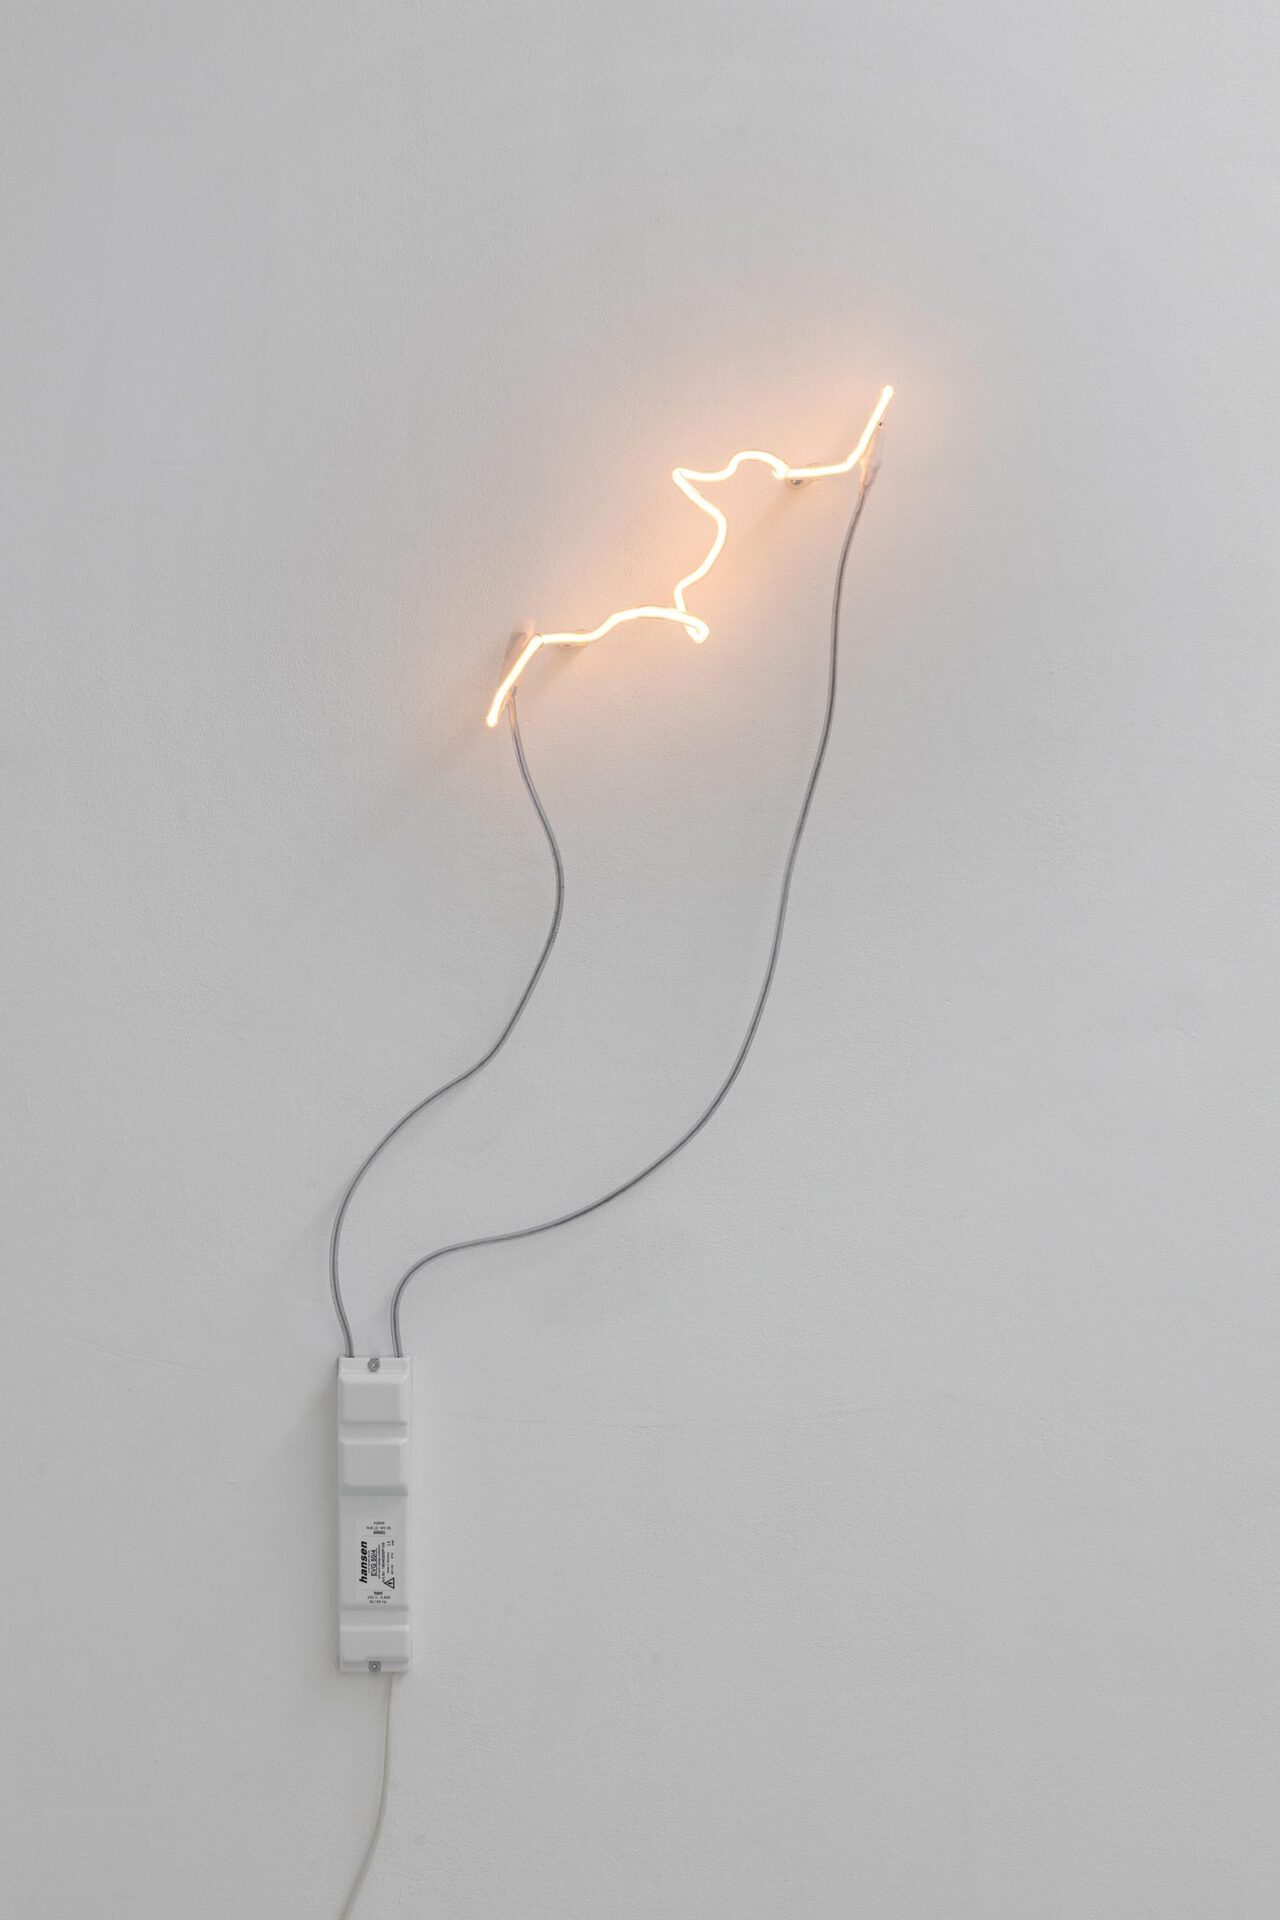 Light technique/He1, clear, Nat Bloch Gregersen, 2021, helium gas, glass, cords, converter, plastic, 42 x 13 x 13 cm. Courtesy of In extenso. Picture : Ludovic Combe.